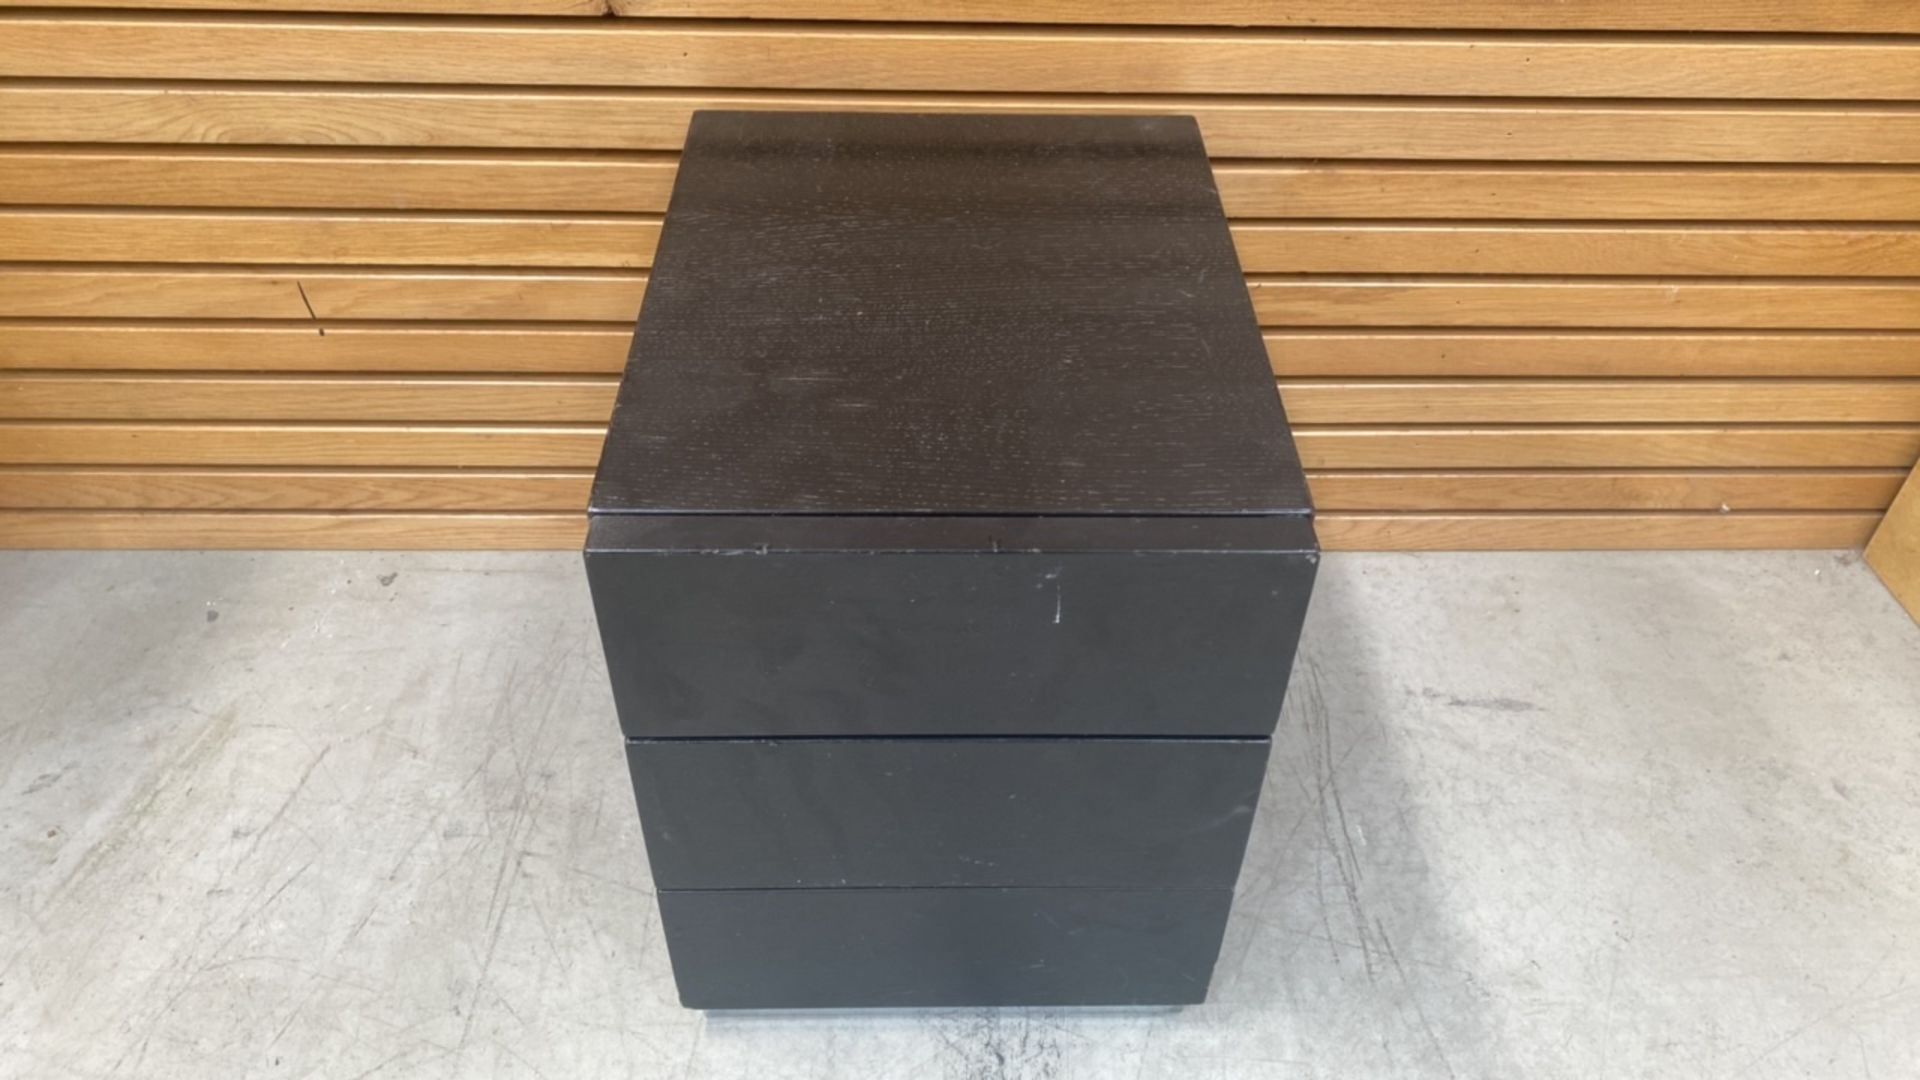 Black Wooden Side Table With 2 Draws - Image 2 of 4